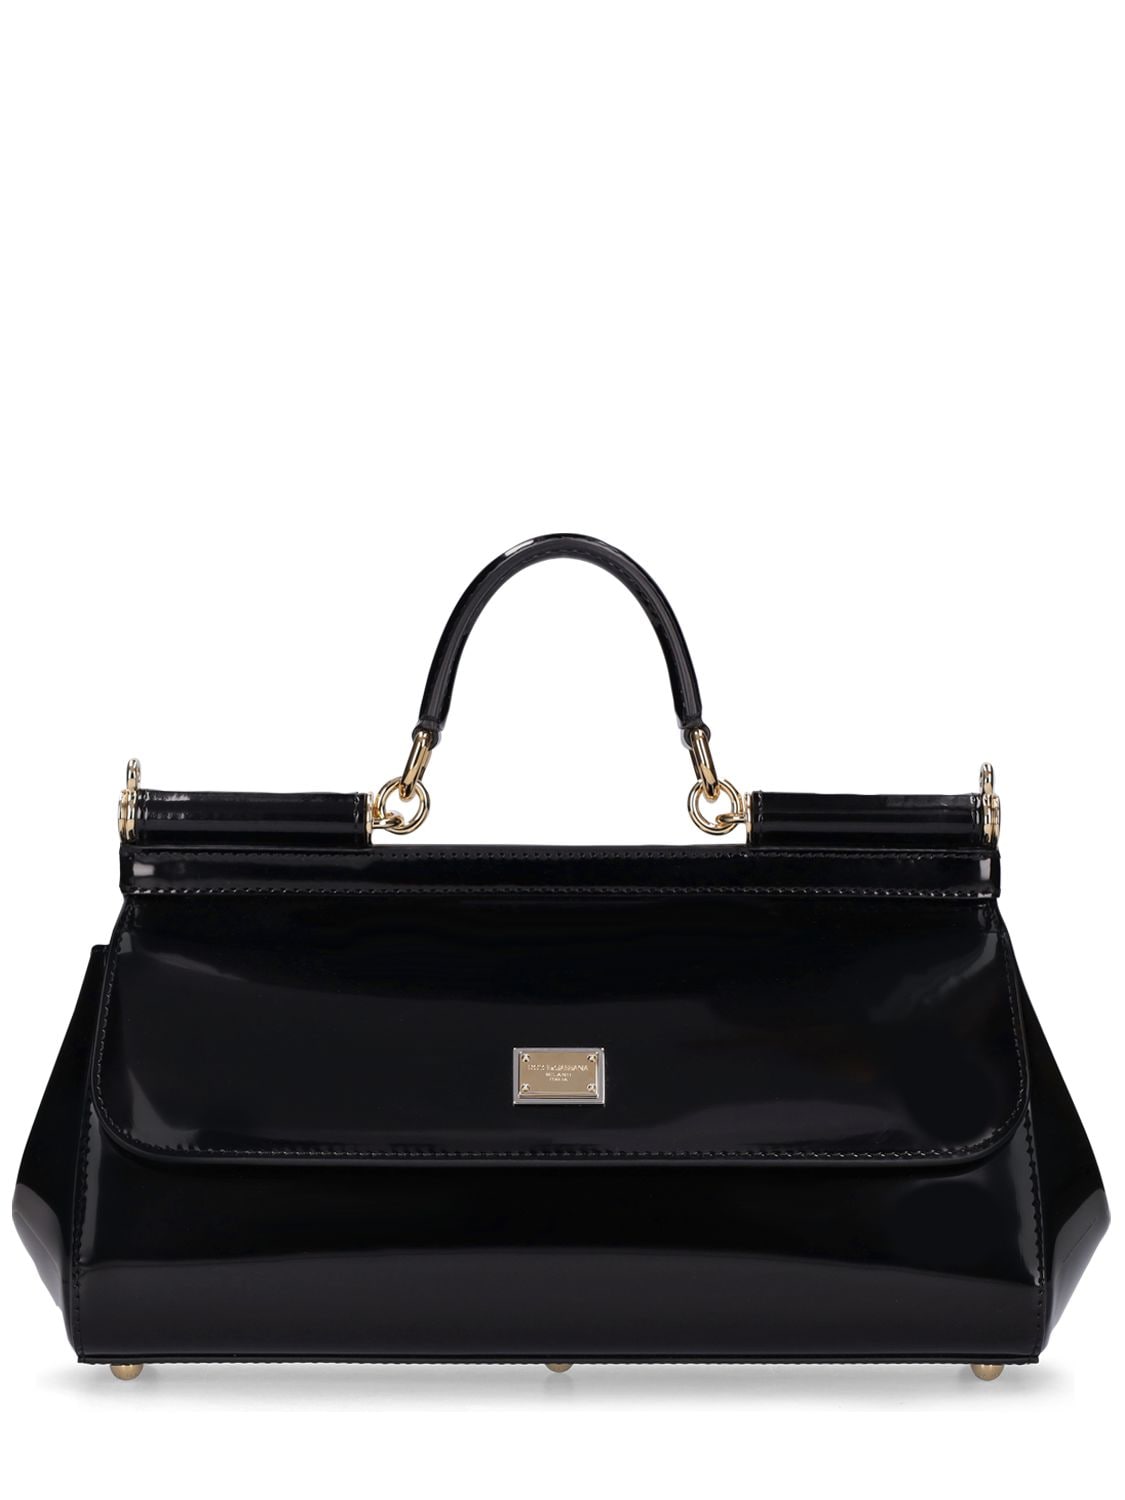 Image of New Sicily Patent Leather Top Handle Bag